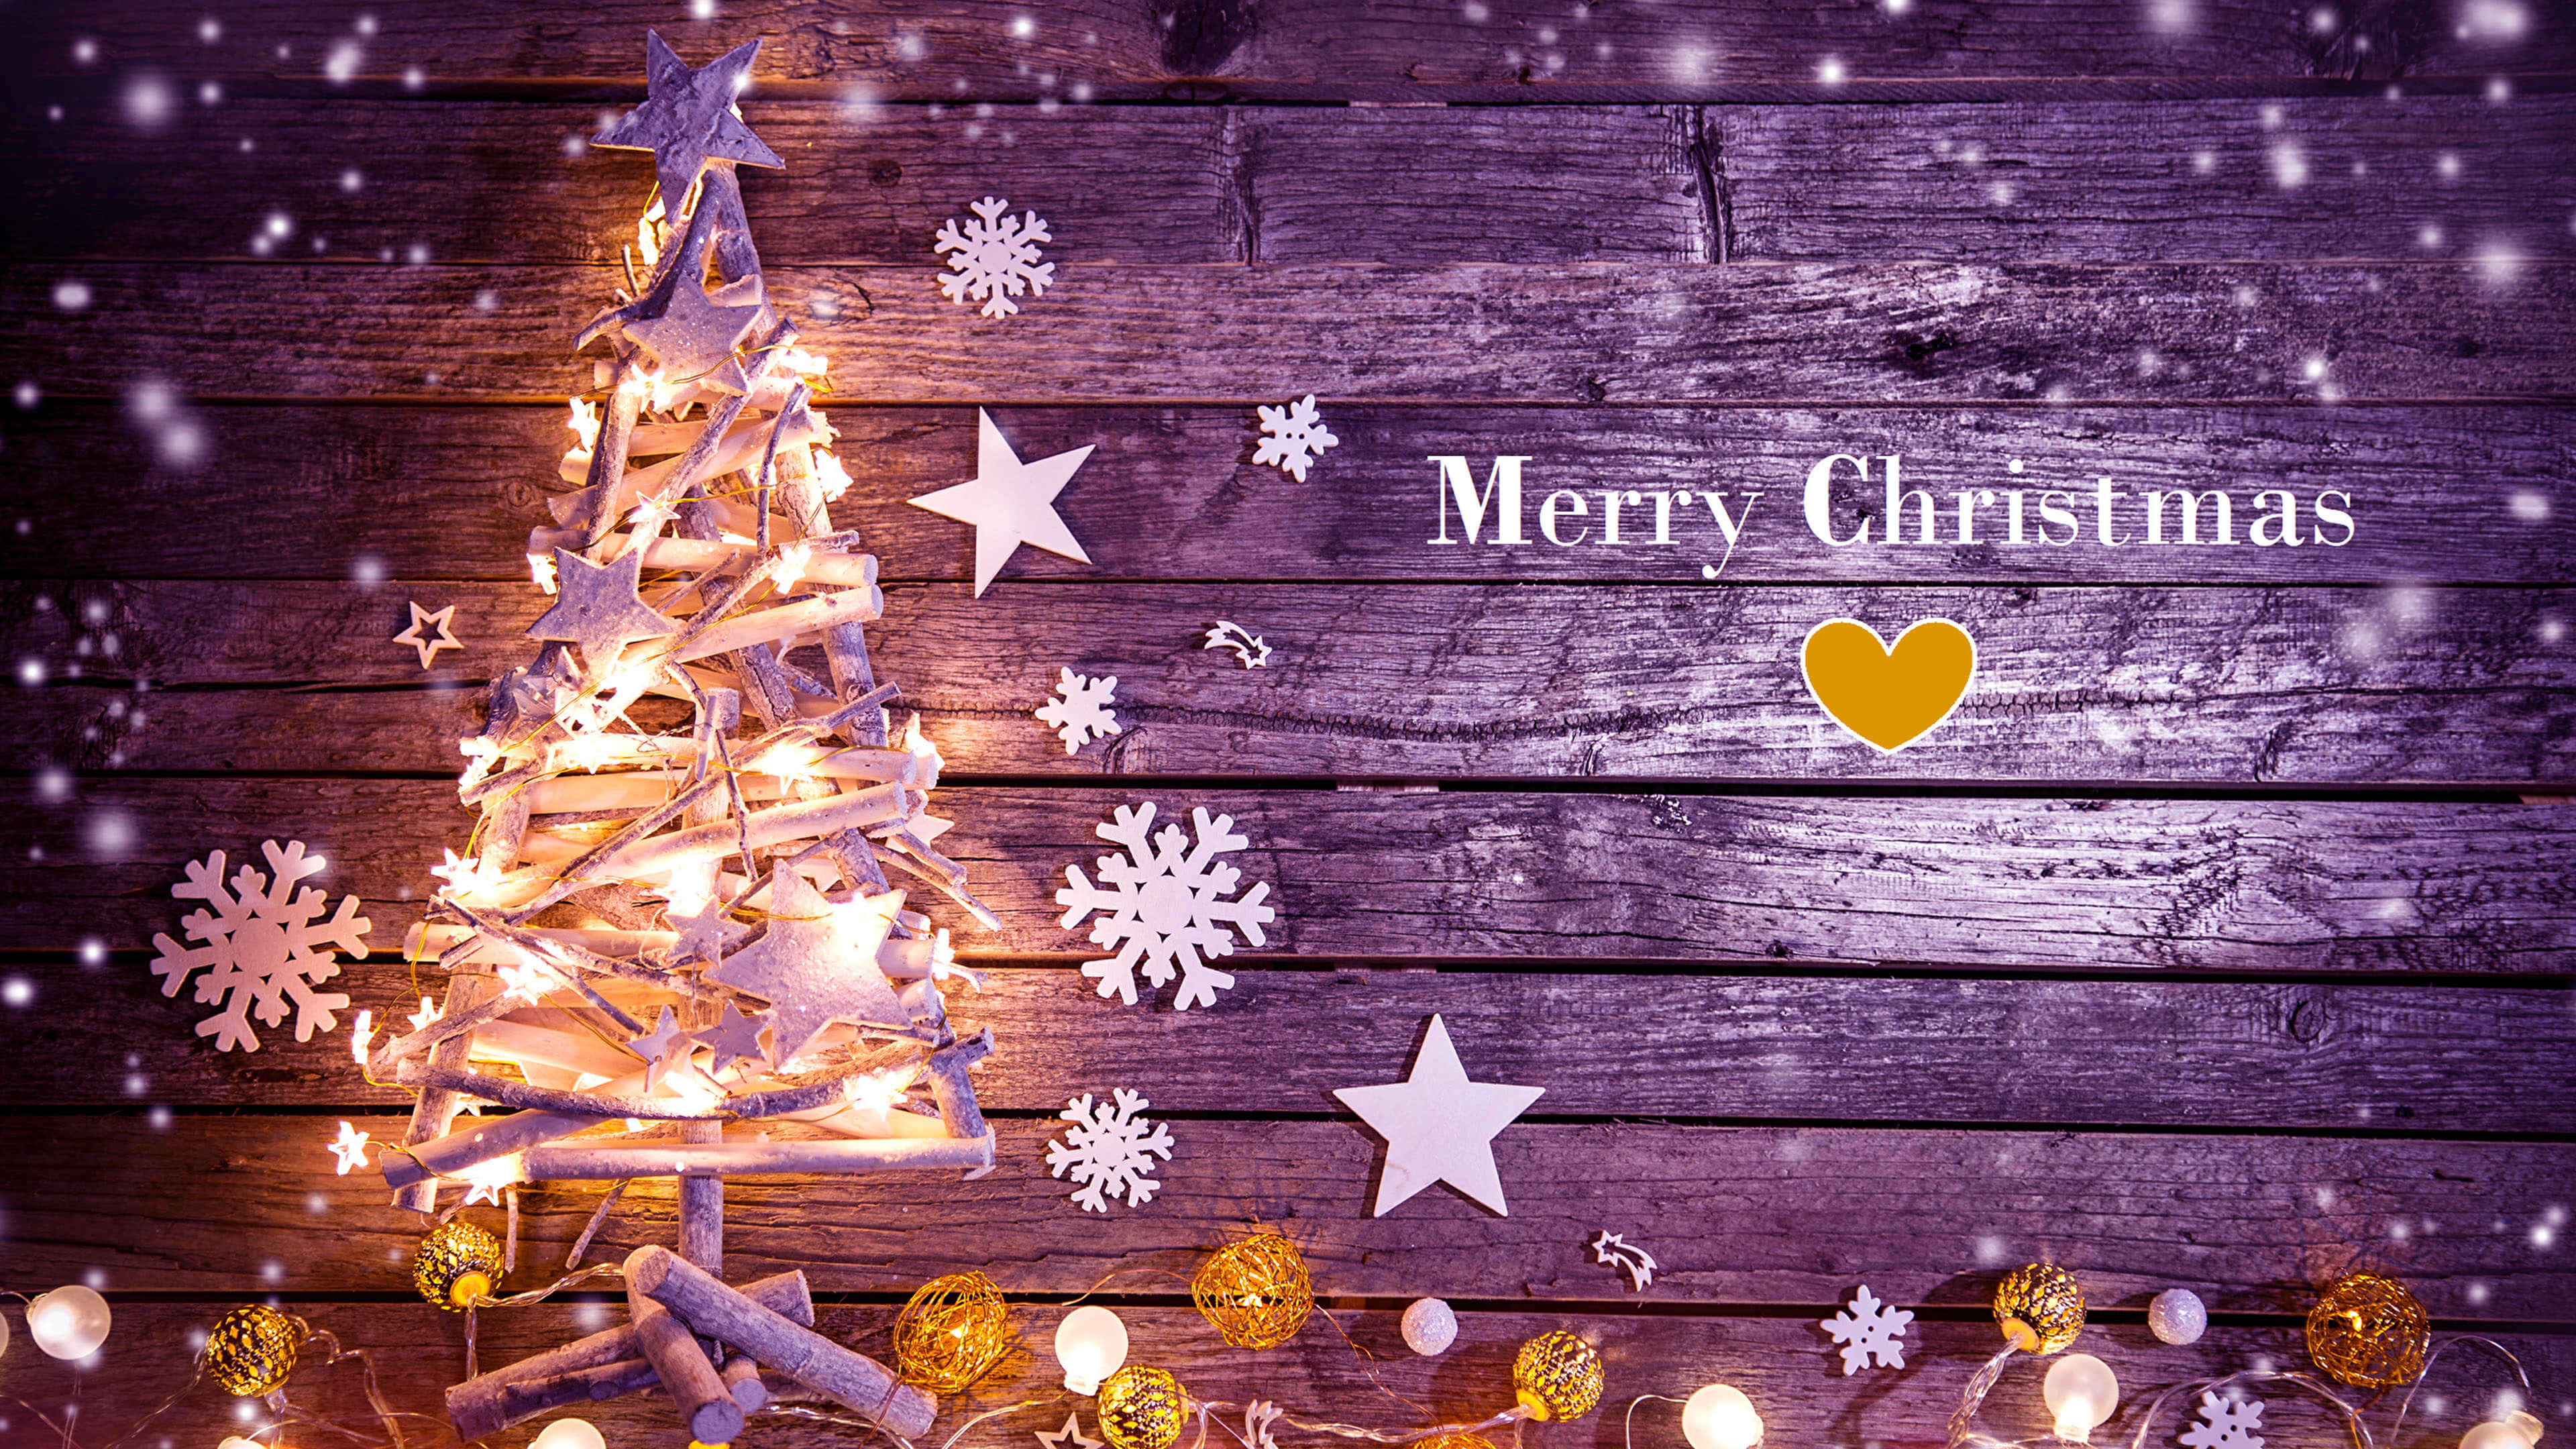 Background Christmas Wallpaper With Words